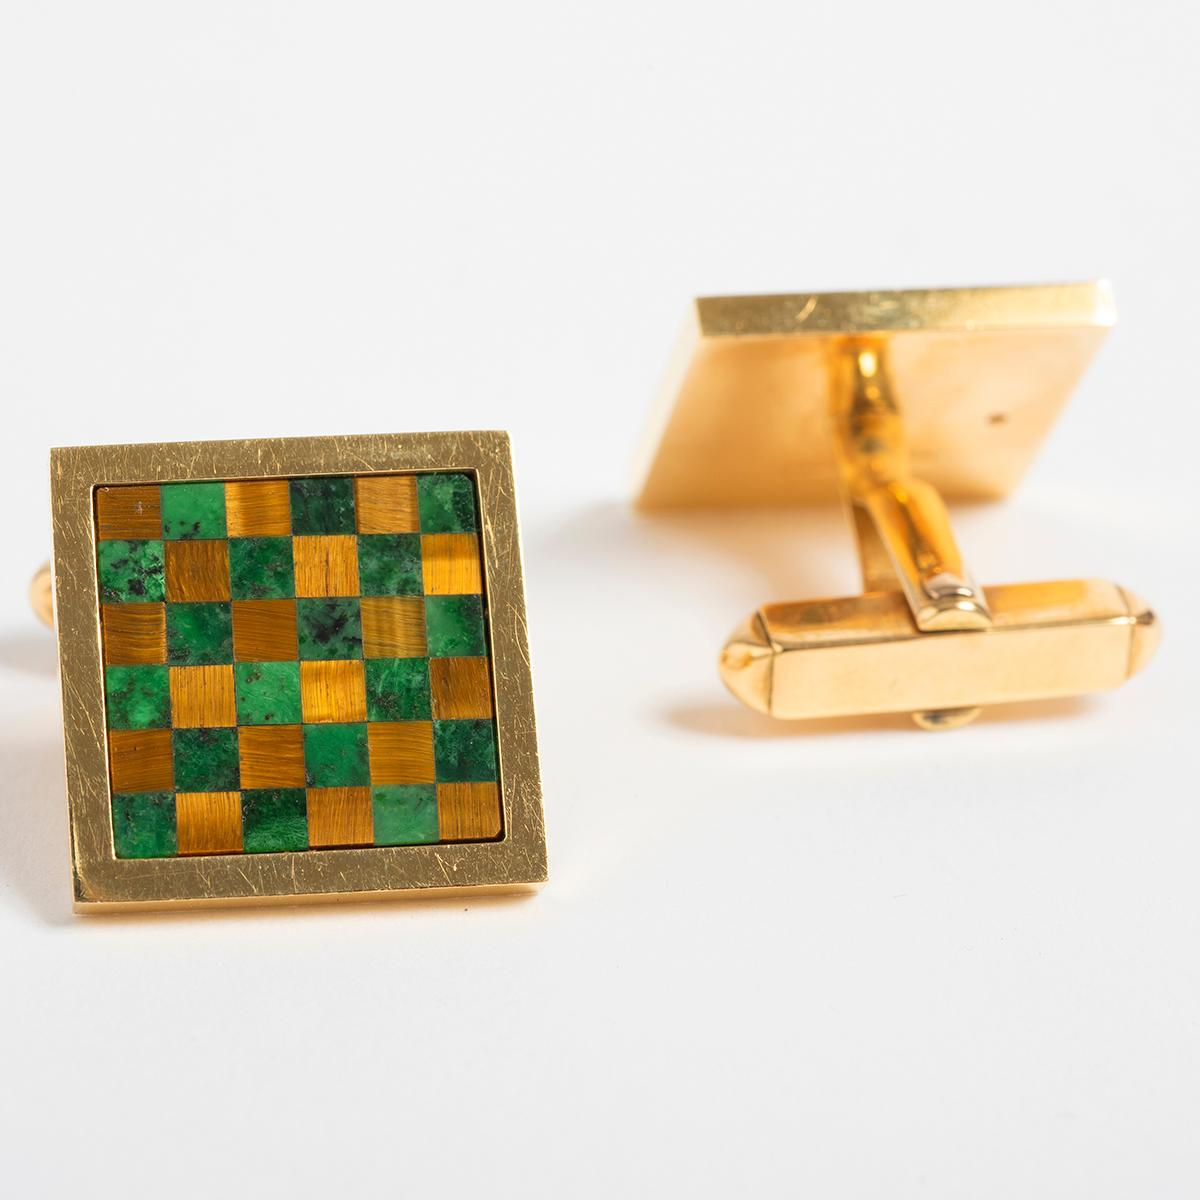 A unique piece within our carefully curated Vintage & Prestige fine jewellery collection, we are delighted to present the following:

These stylish and classic tiger eye and malachite cufflinks are set in 18K Yellow Gold. An ideal gift for yourself